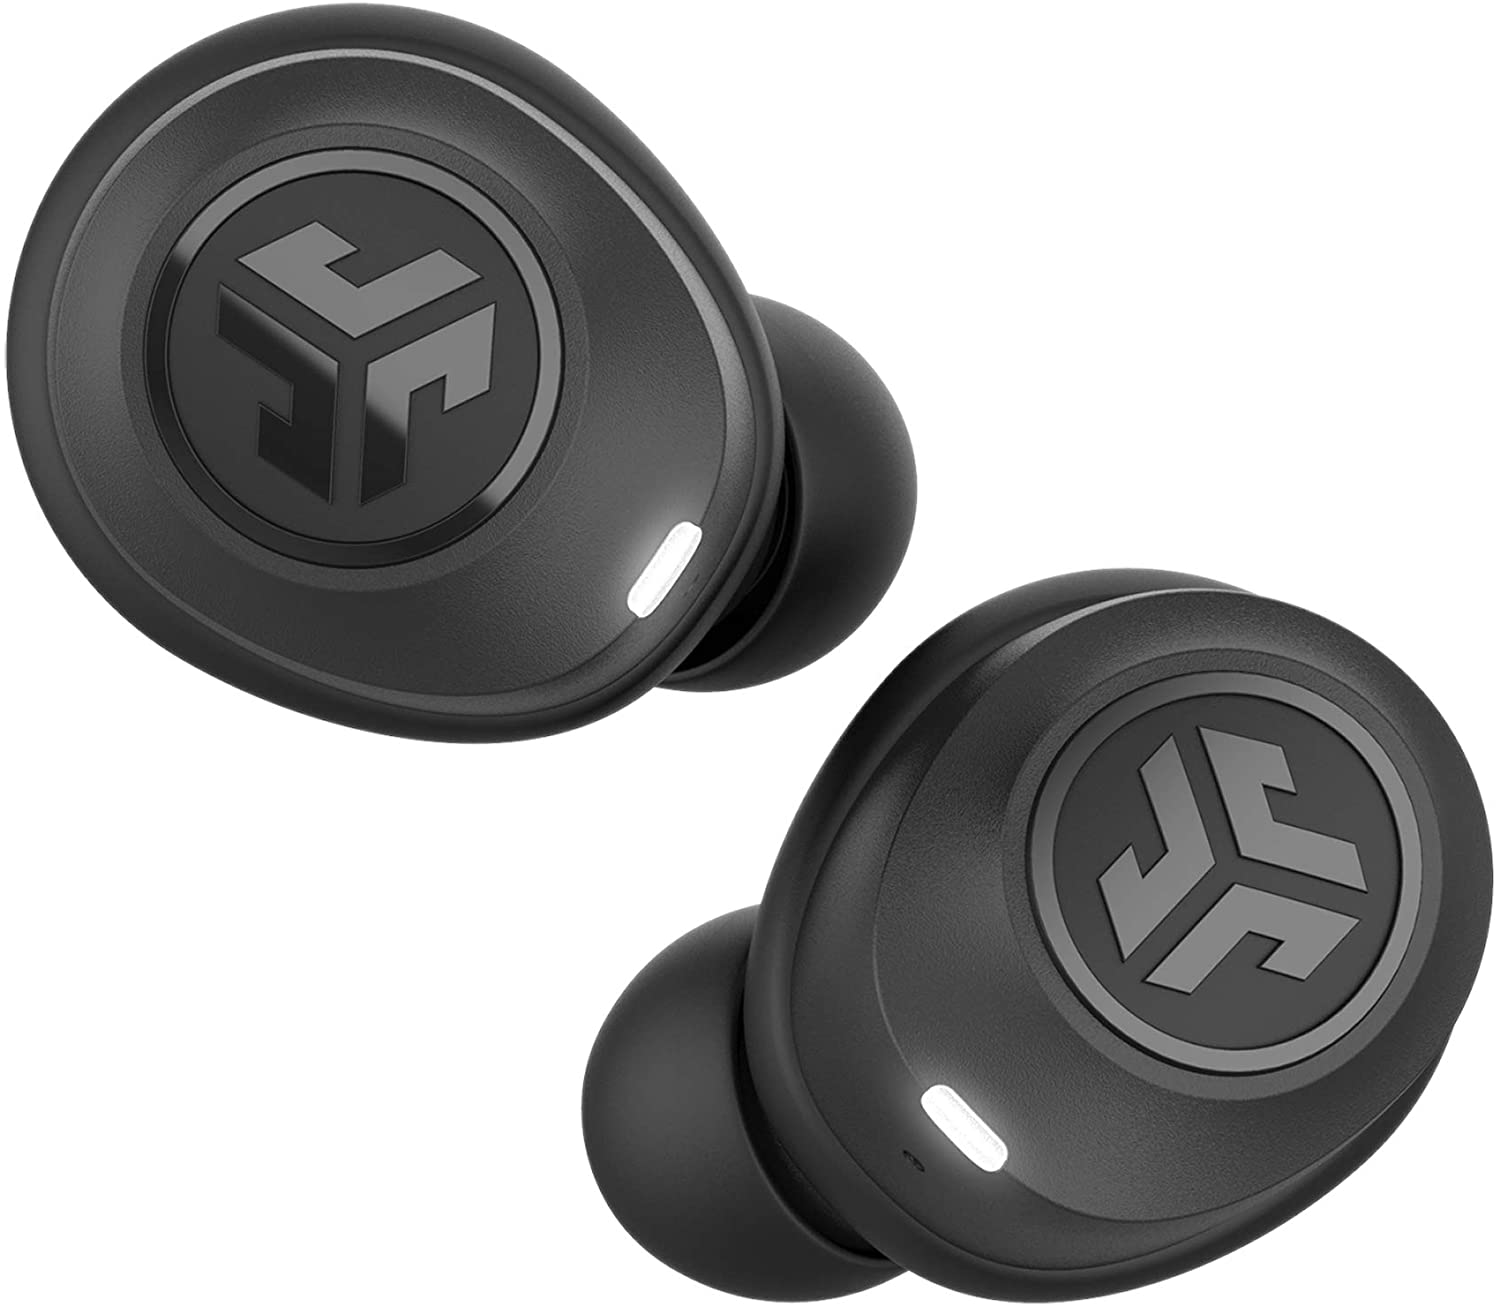 JLab JBuds Air True Wireless Signature Bluetooth Earbuds with Charging Case - Black - Pro-Distributing